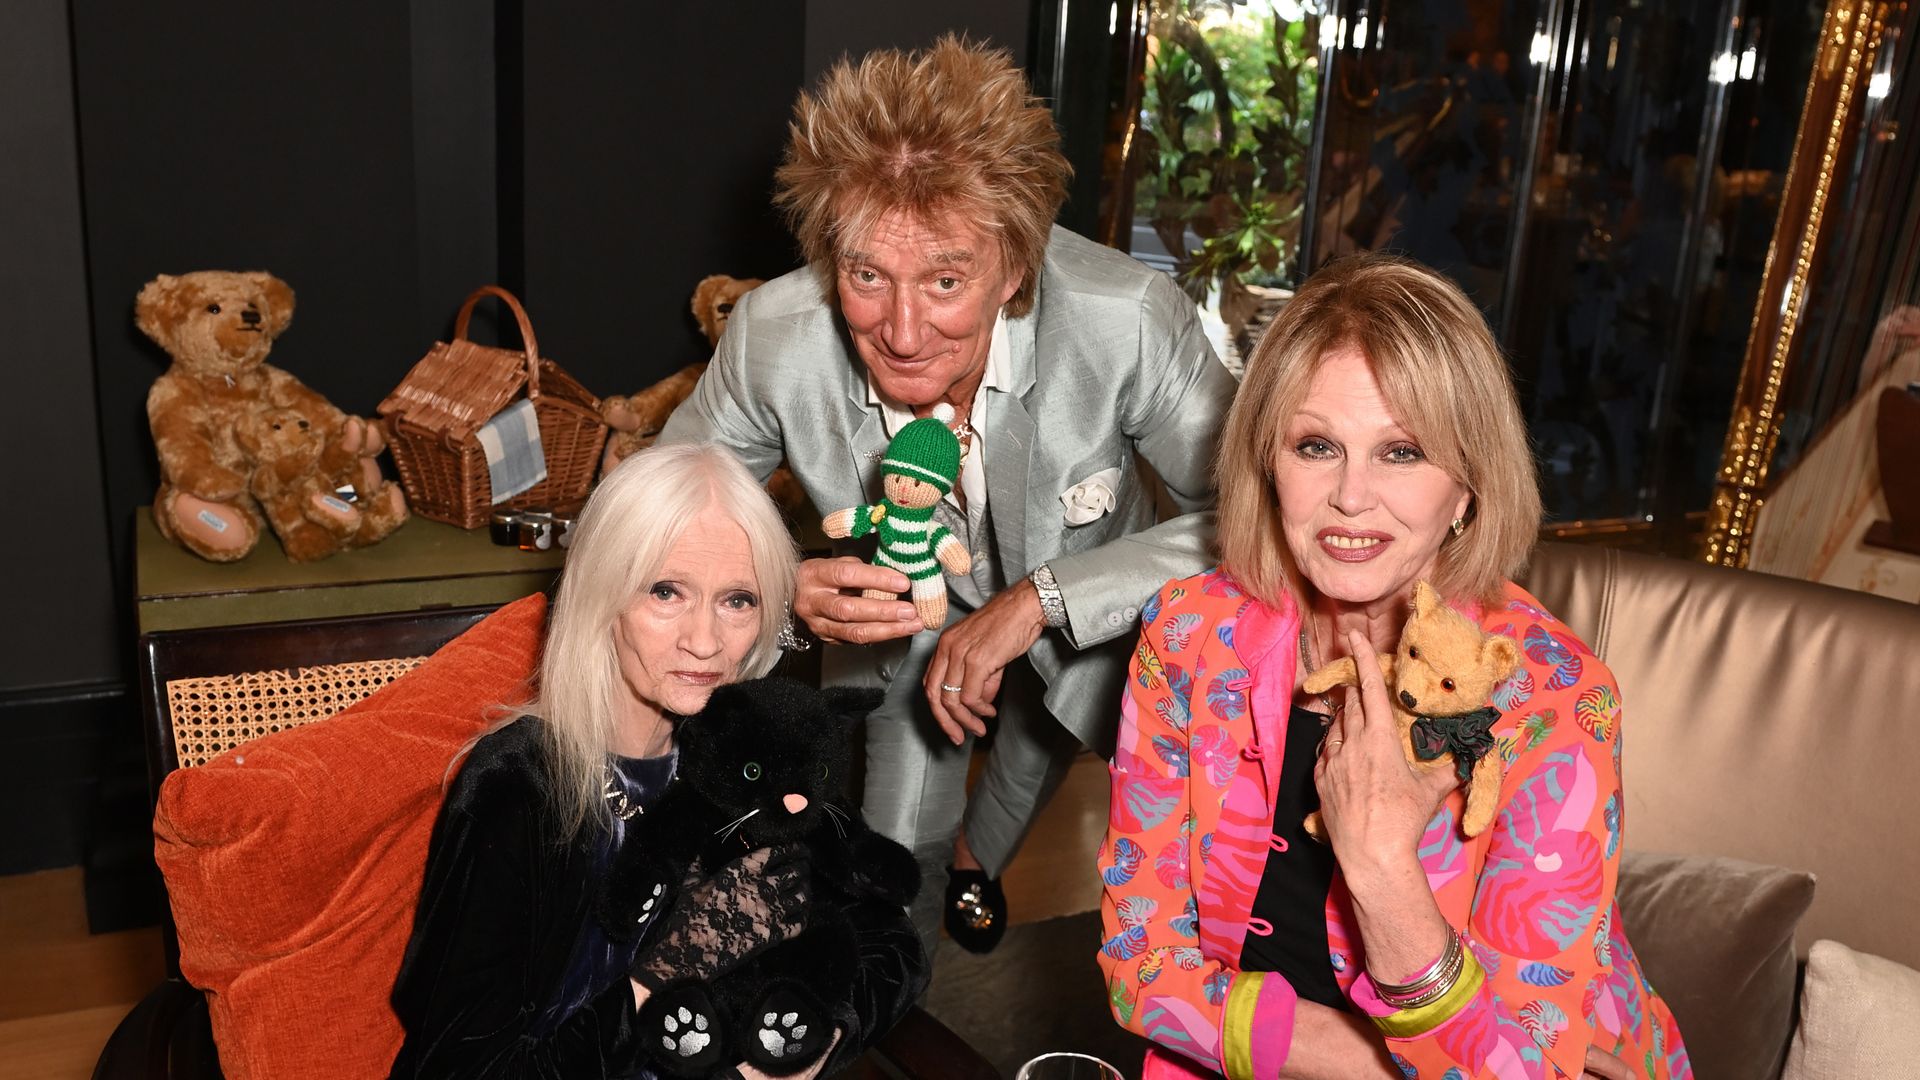 Celia Hammond wears black as she joins Rod Stewart in a silver suit and Joanna Lumley